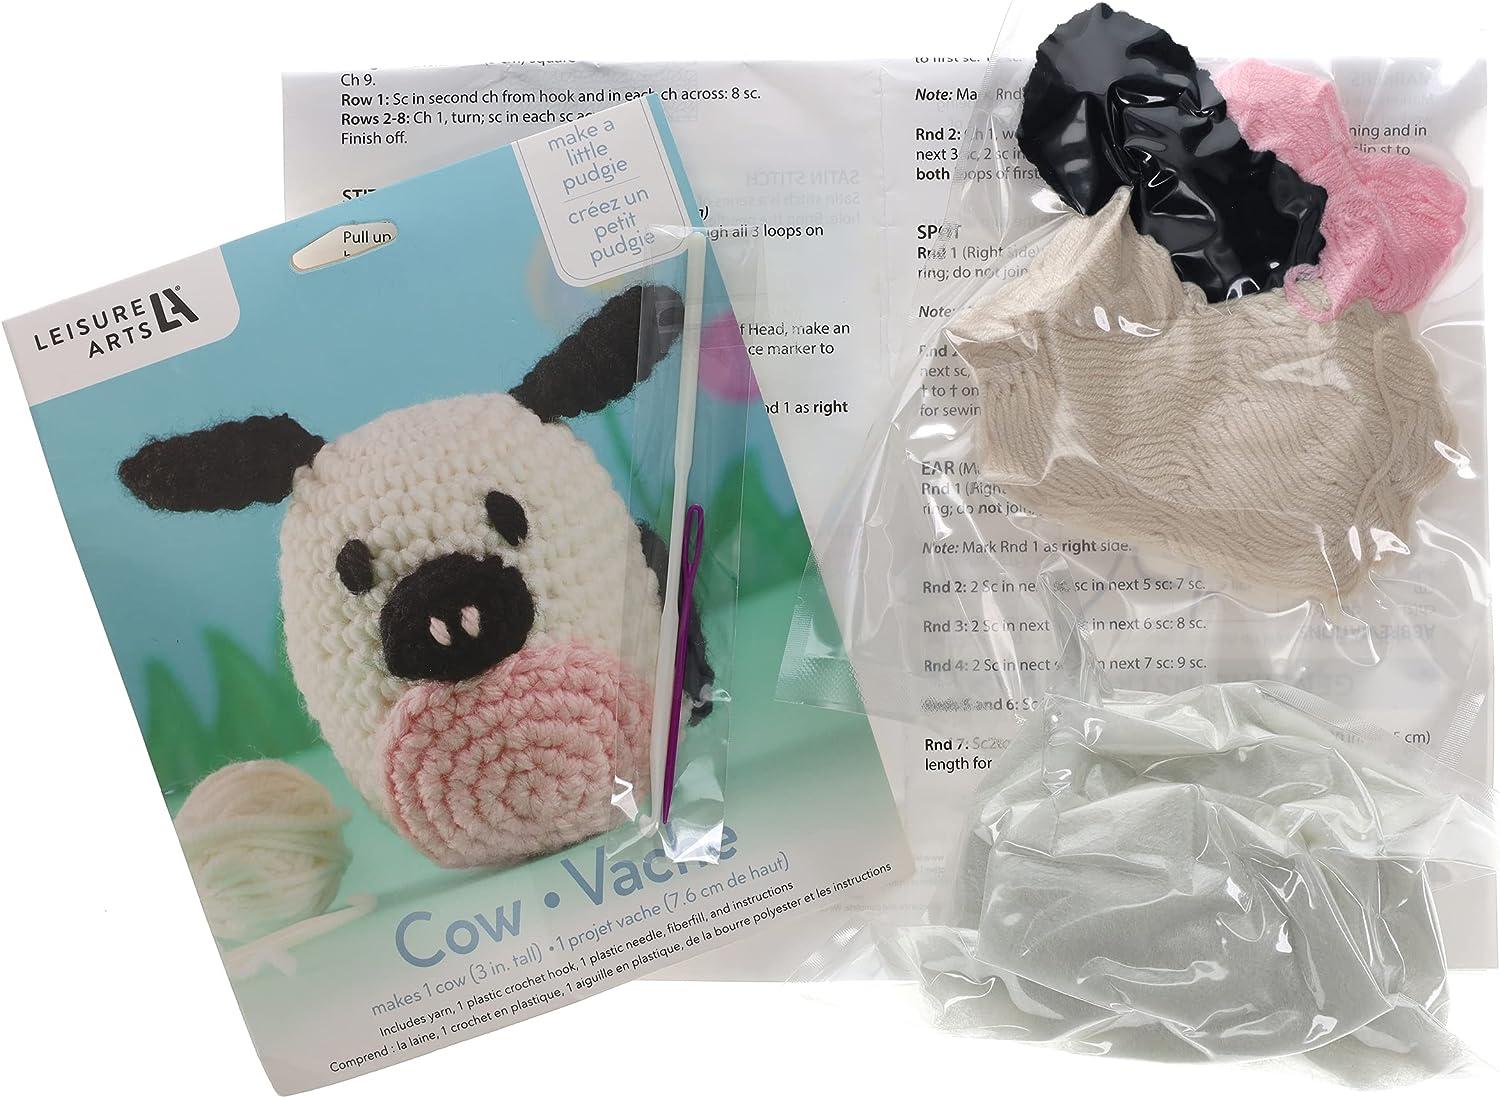 LEISURE ARTS Pudgies Animals Crochet Kit, Cow, 3, Complete Crochet kit,  Learn to Crochet Animal Starter kit for All Ages, Includes Instructions,  DIY amigurumi Crochet Kits